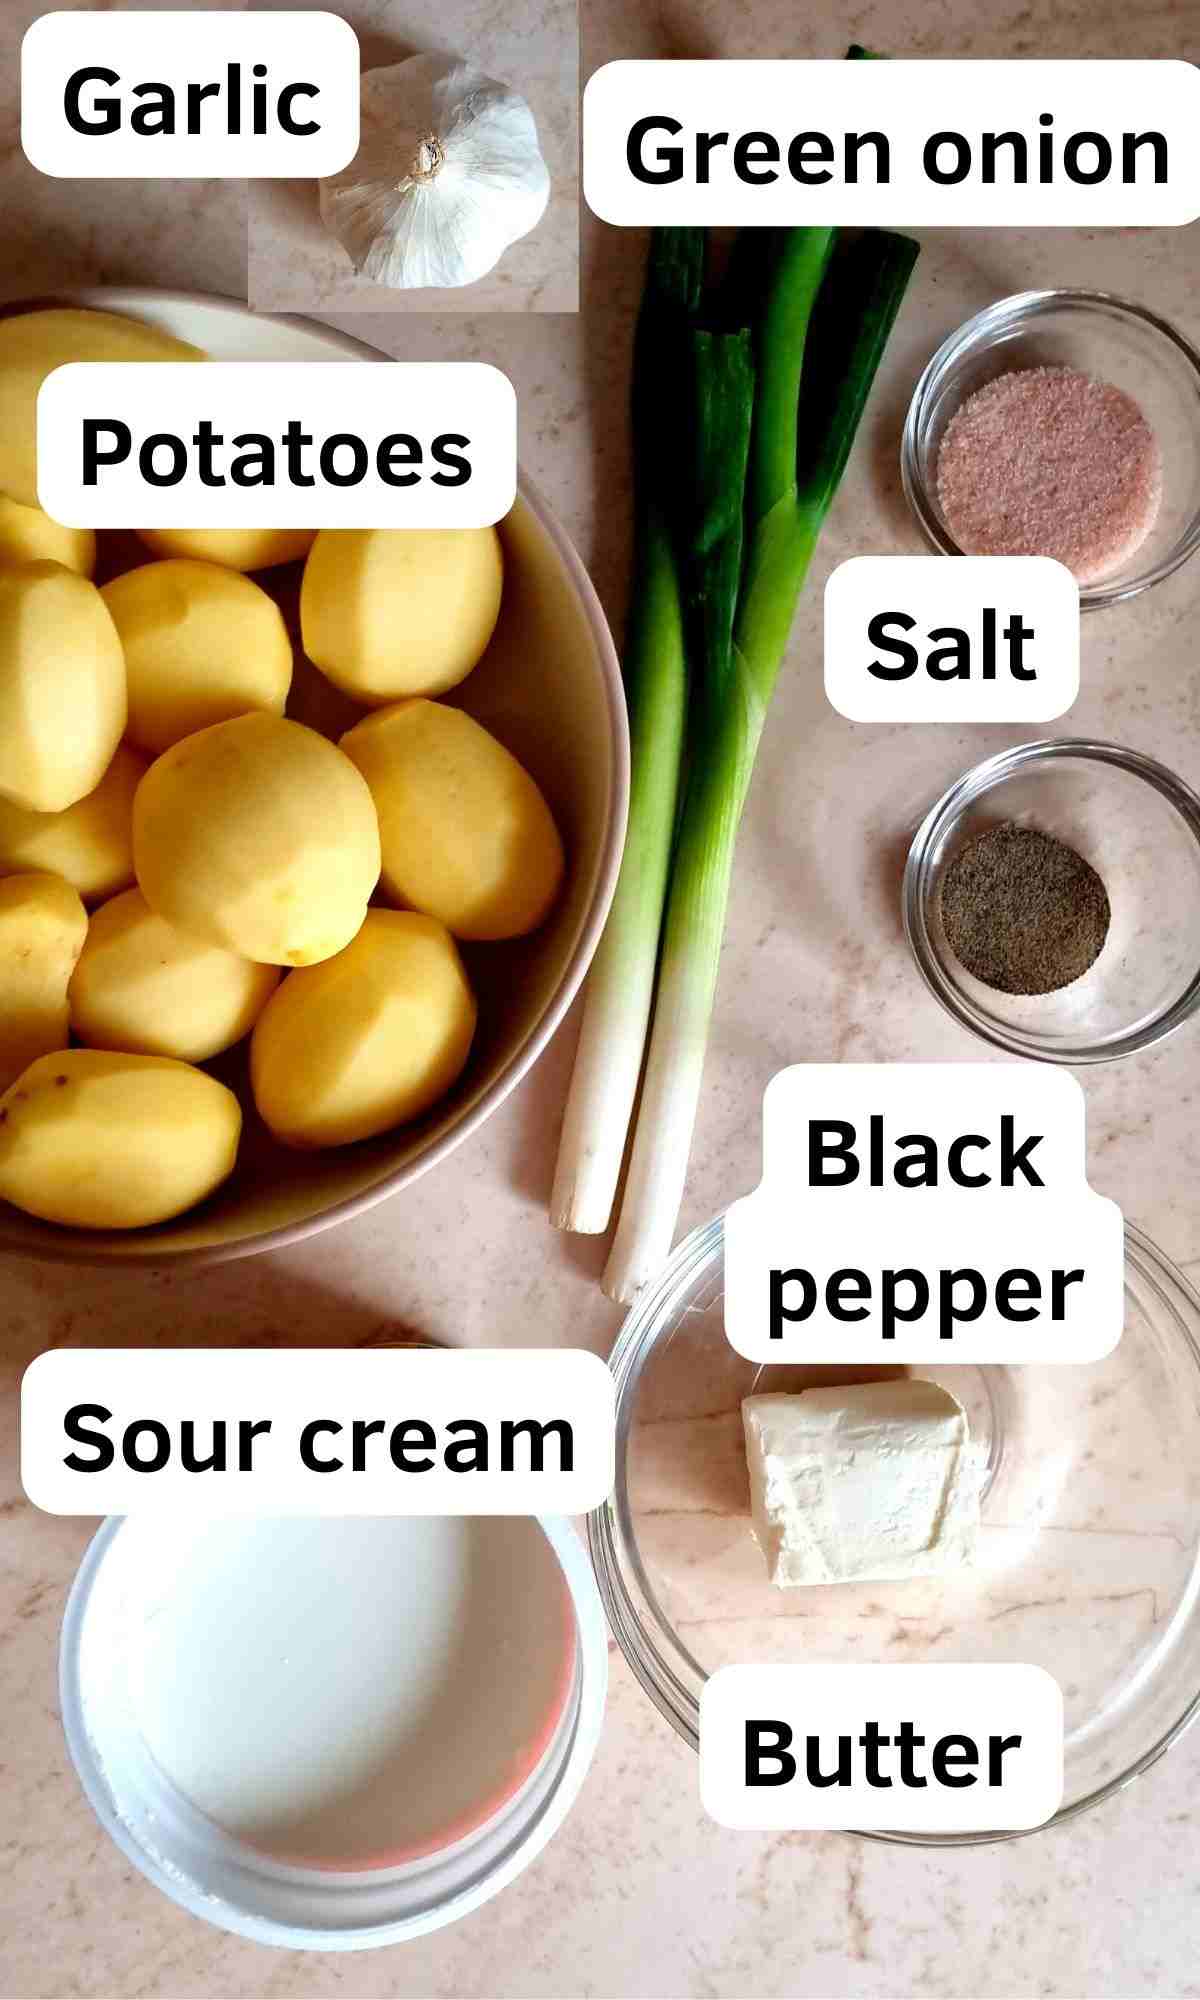 Ingredients for mashed potatoes.